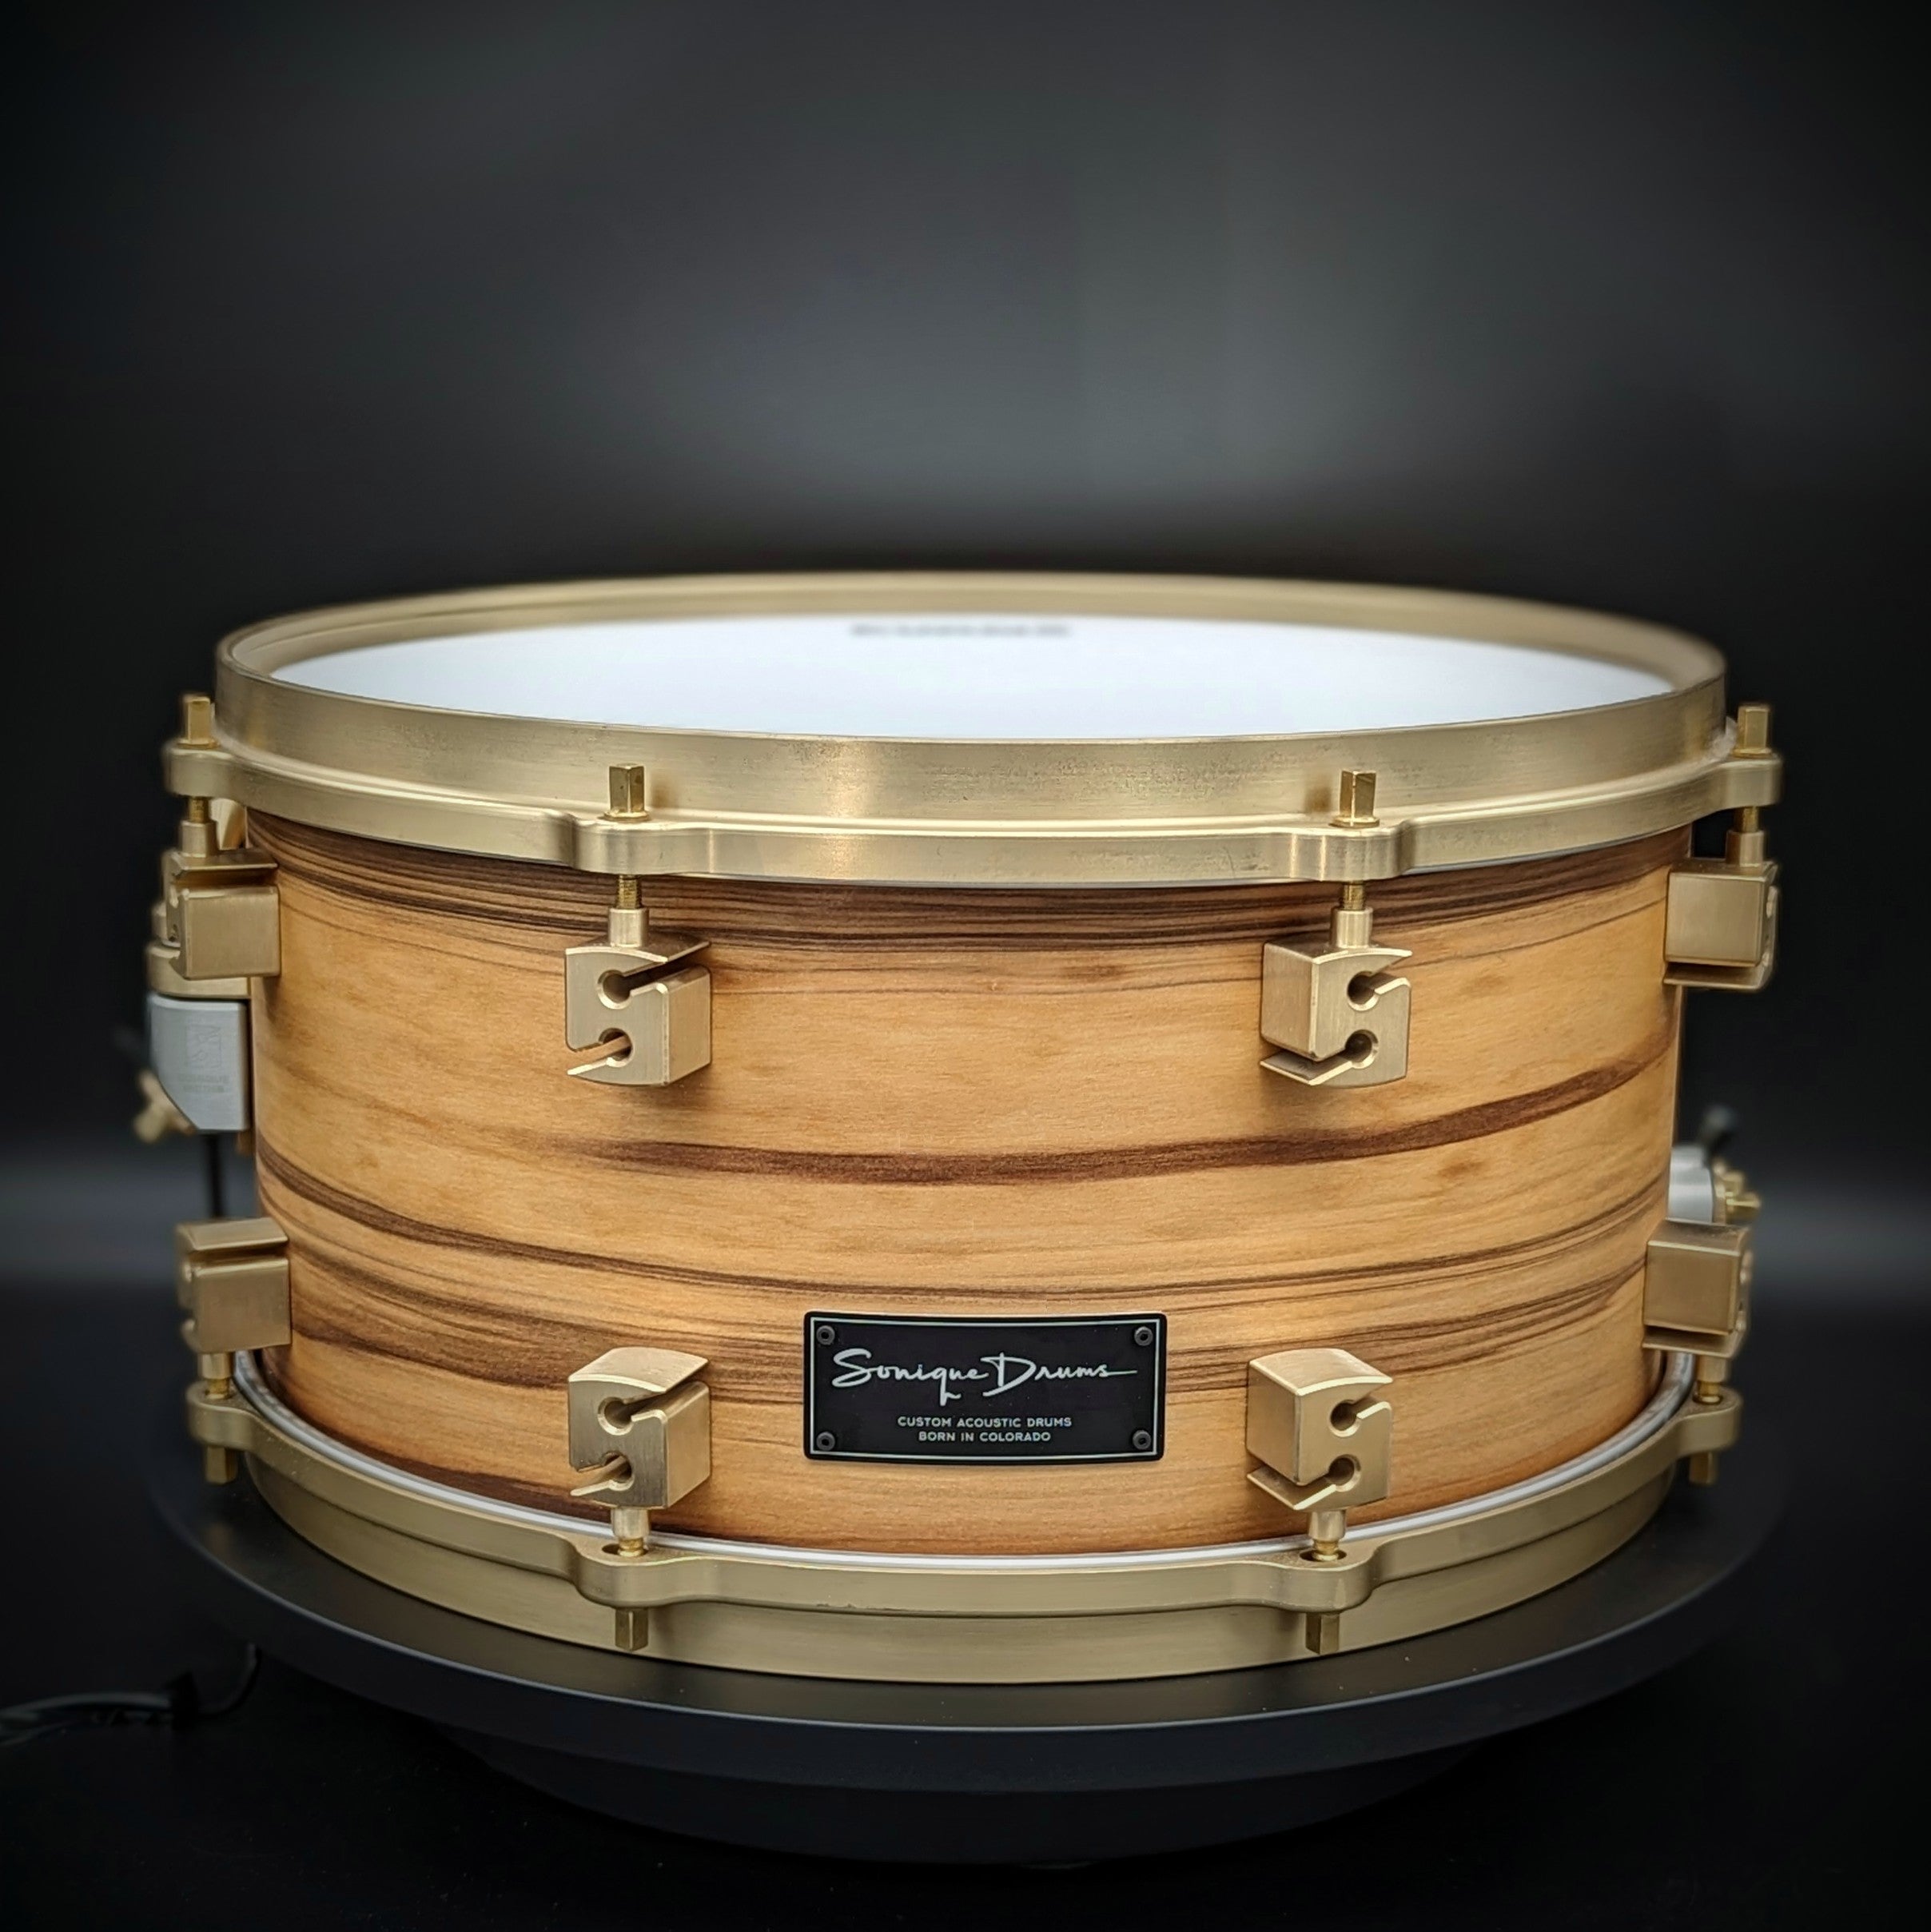 Pearl Free Floating 6-ply Maple Snare Drum Natural 14×6.5 Inches